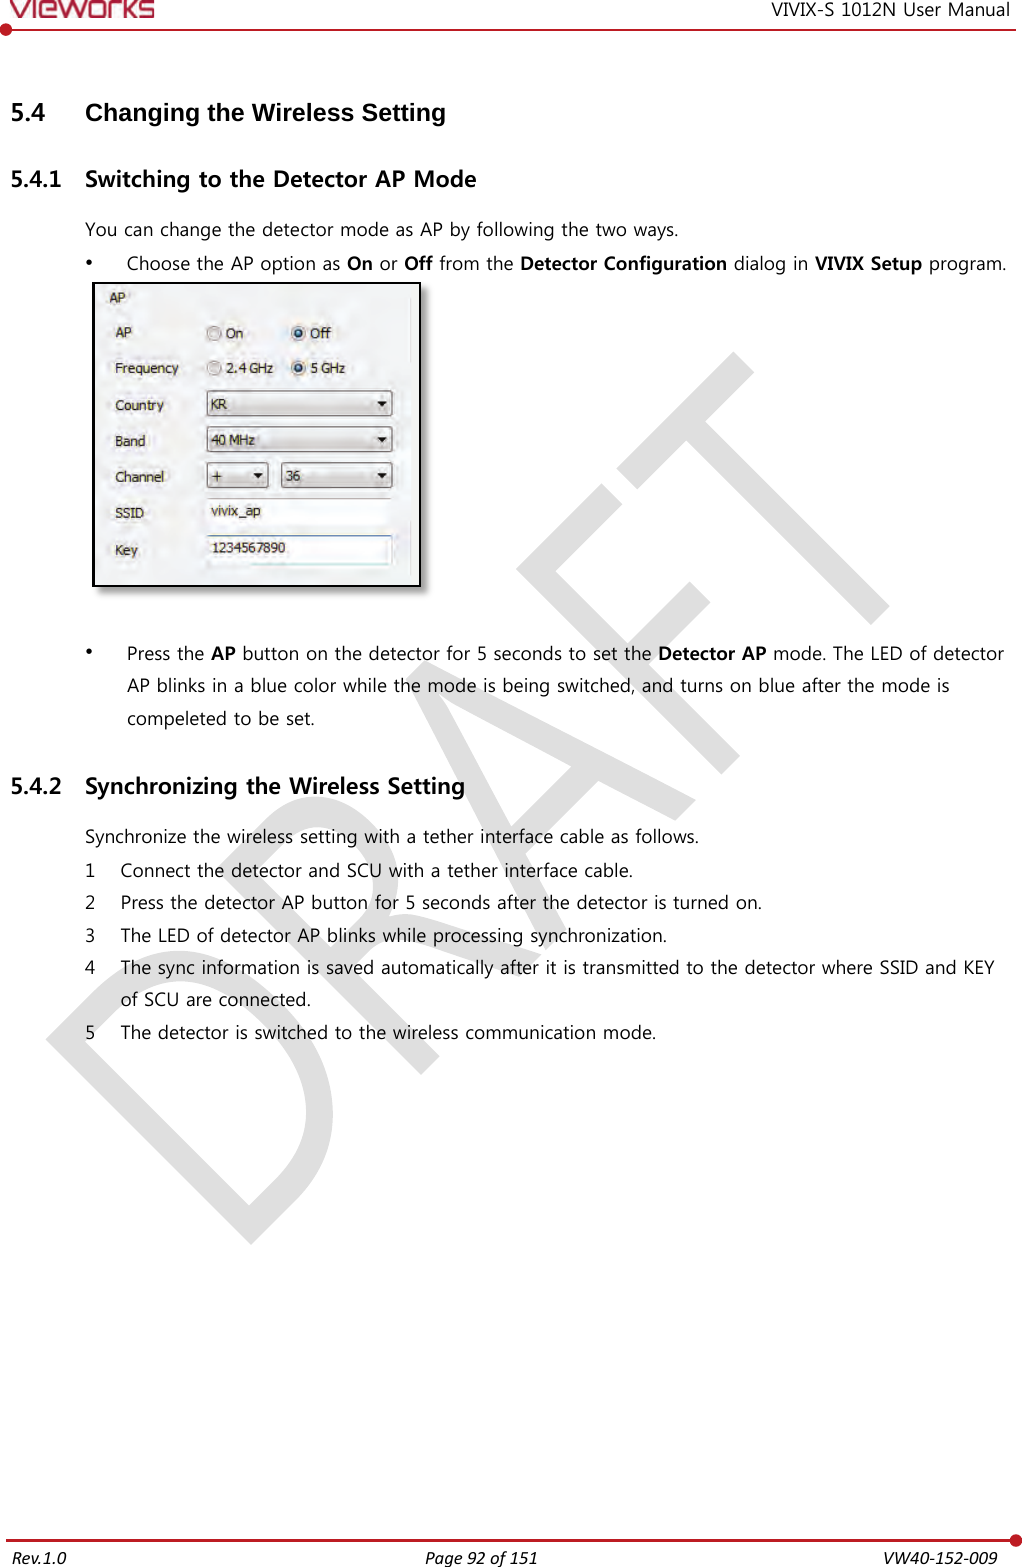   Rev.1.0 Page 92 of 151  VW40-152-009 VIVIX-S 1012N User Manual 5.4 Changing the Wireless Setting 5.4.1 Switching to the Detector AP Mode You can change the detector mode as AP by following the two ways.  Choose the AP option as On or Off from the Detector Configuration dialog in VIVIX Setup program.    Press the AP button on the detector for 5 seconds to set the Detector AP mode. The LED of detector AP blinks in a blue color while the mode is being switched, and turns on blue after the mode is compeleted to be set. 5.4.2 Synchronizing the Wireless Setting Synchronize the wireless setting with a tether interface cable as follows. 1 Connect the detector and SCU with a tether interface cable. 2 Press the detector AP button for 5 seconds after the detector is turned on. 3 The LED of detector AP blinks while processing synchronization. 4 The sync information is saved automatically after it is transmitted to the detector where SSID and KEY of SCU are connected. 5 The detector is switched to the wireless communication mode. 